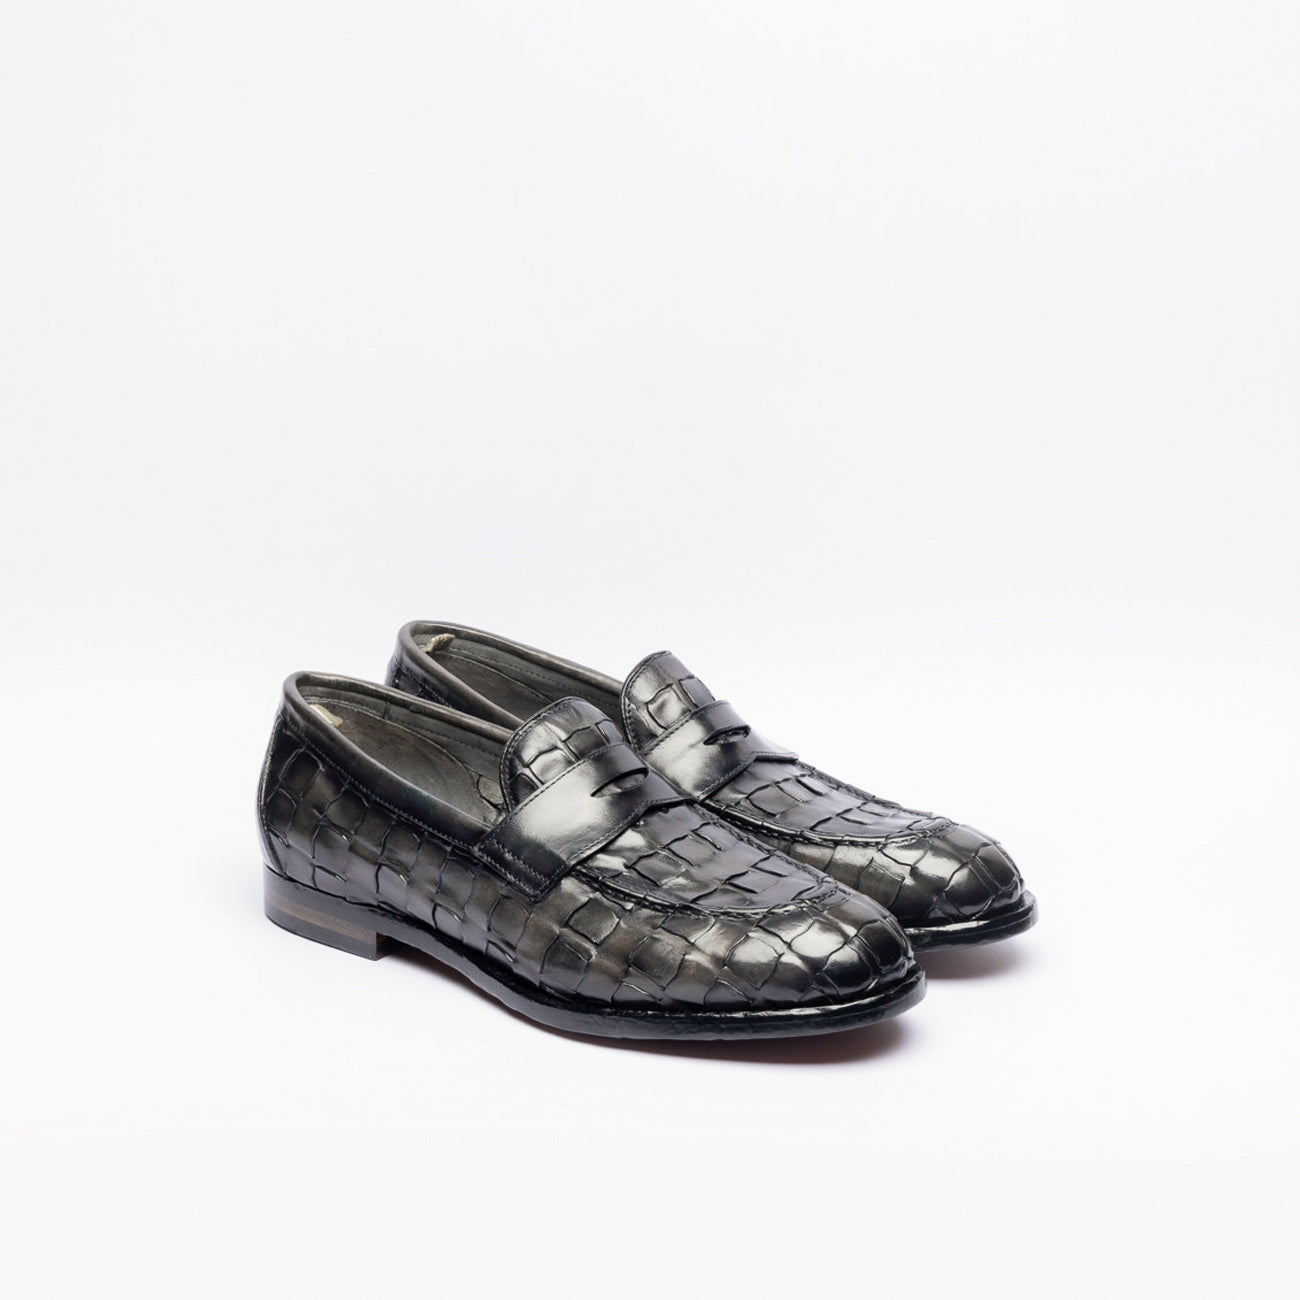 Officine Creative Ivy/016 penny loafer in blue woven leather (dark grey)